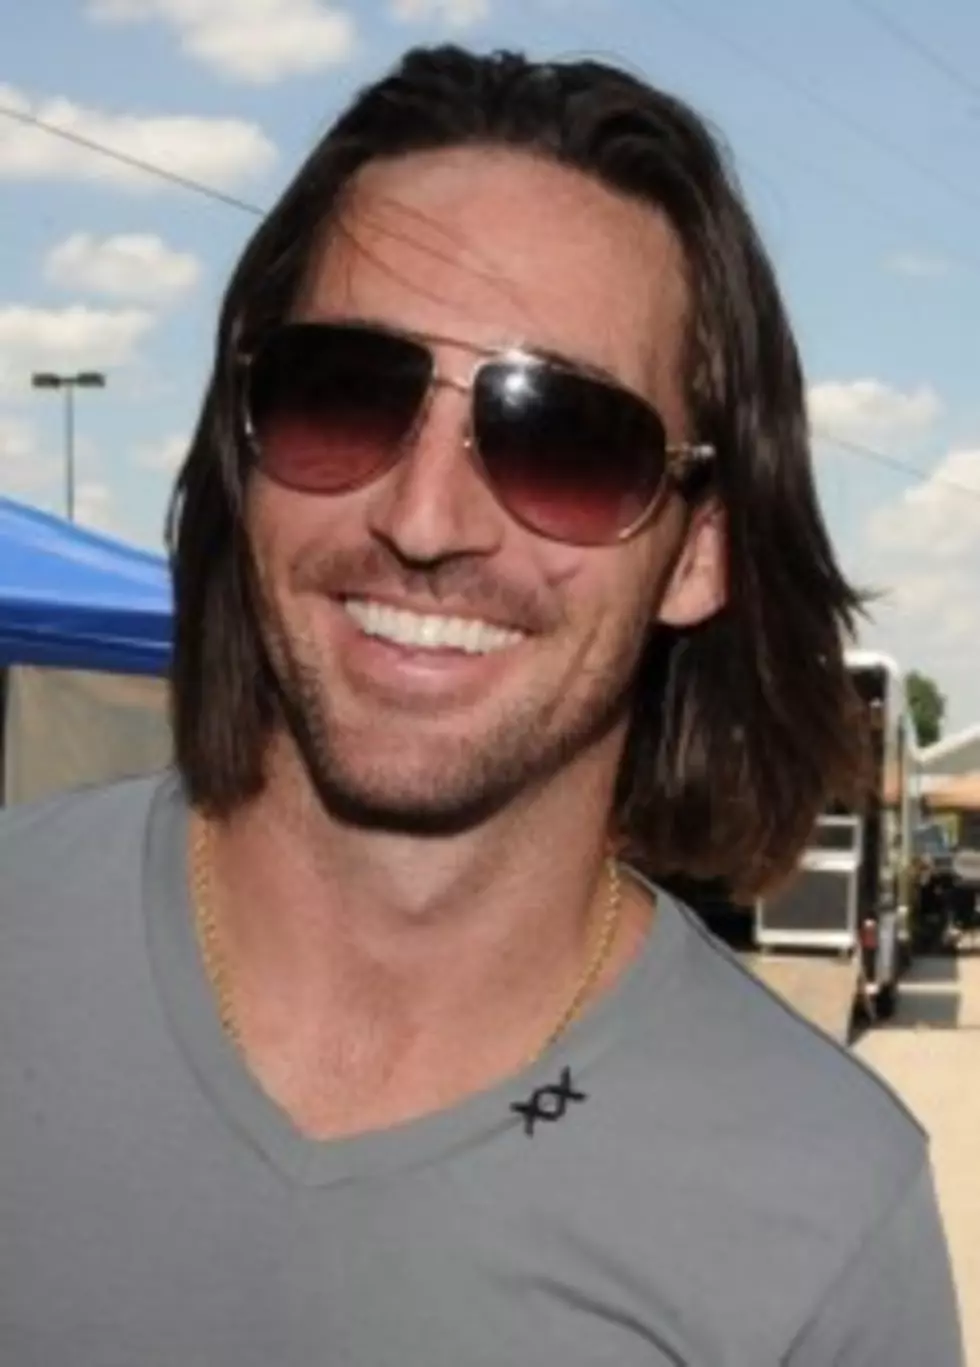 Jake Owen May Have Back To Back Hits With New Song &#8220;Alone With You&#8221; [VIDEO]